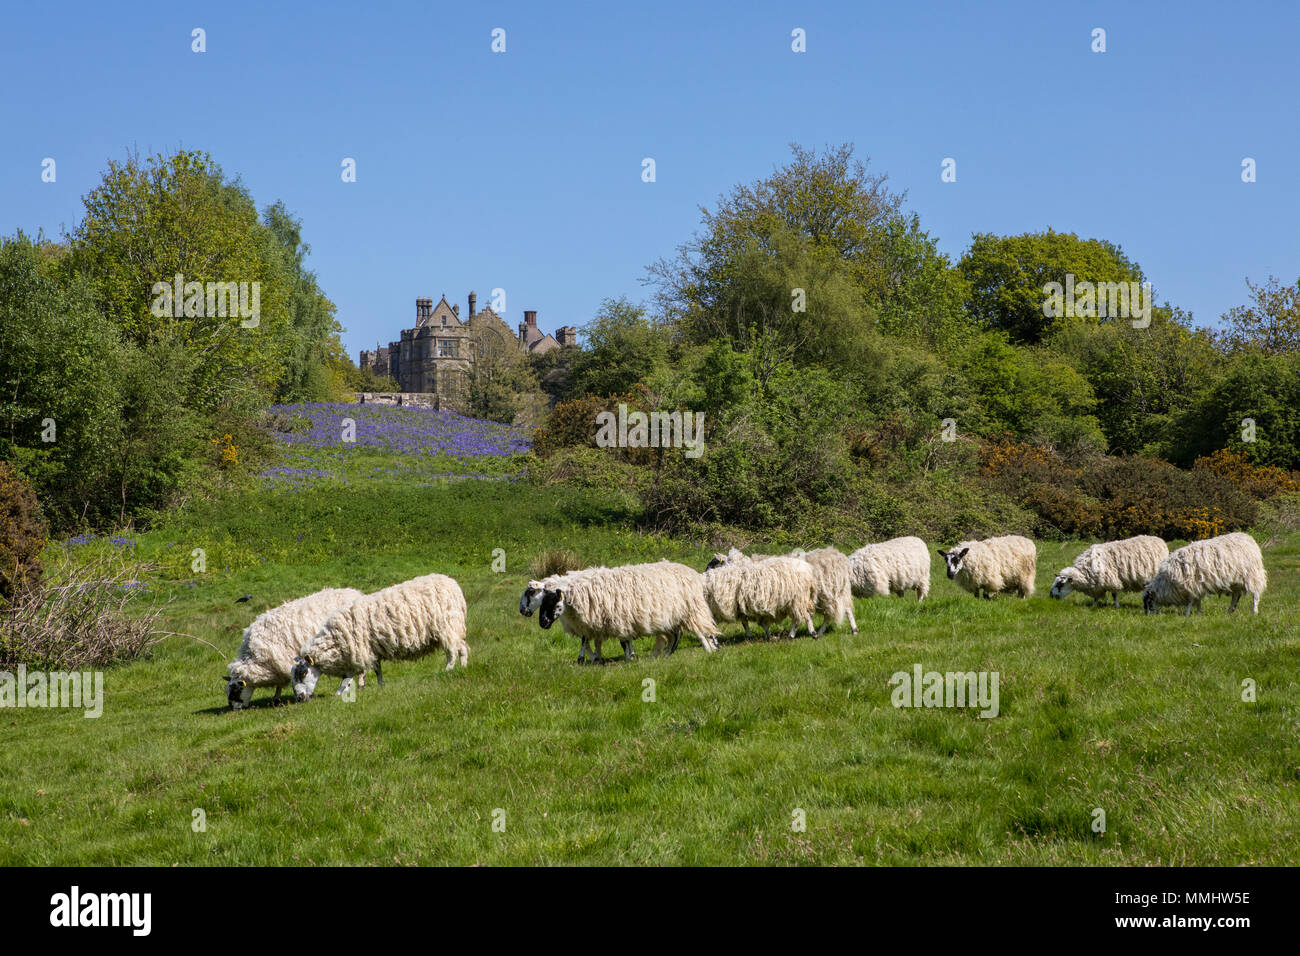 A herd of sheep on the fields at Battle Abbey in East Sussex, UK. The fields at the Abbey were the location of the Battle of Hastings in 1066. Stock Photo